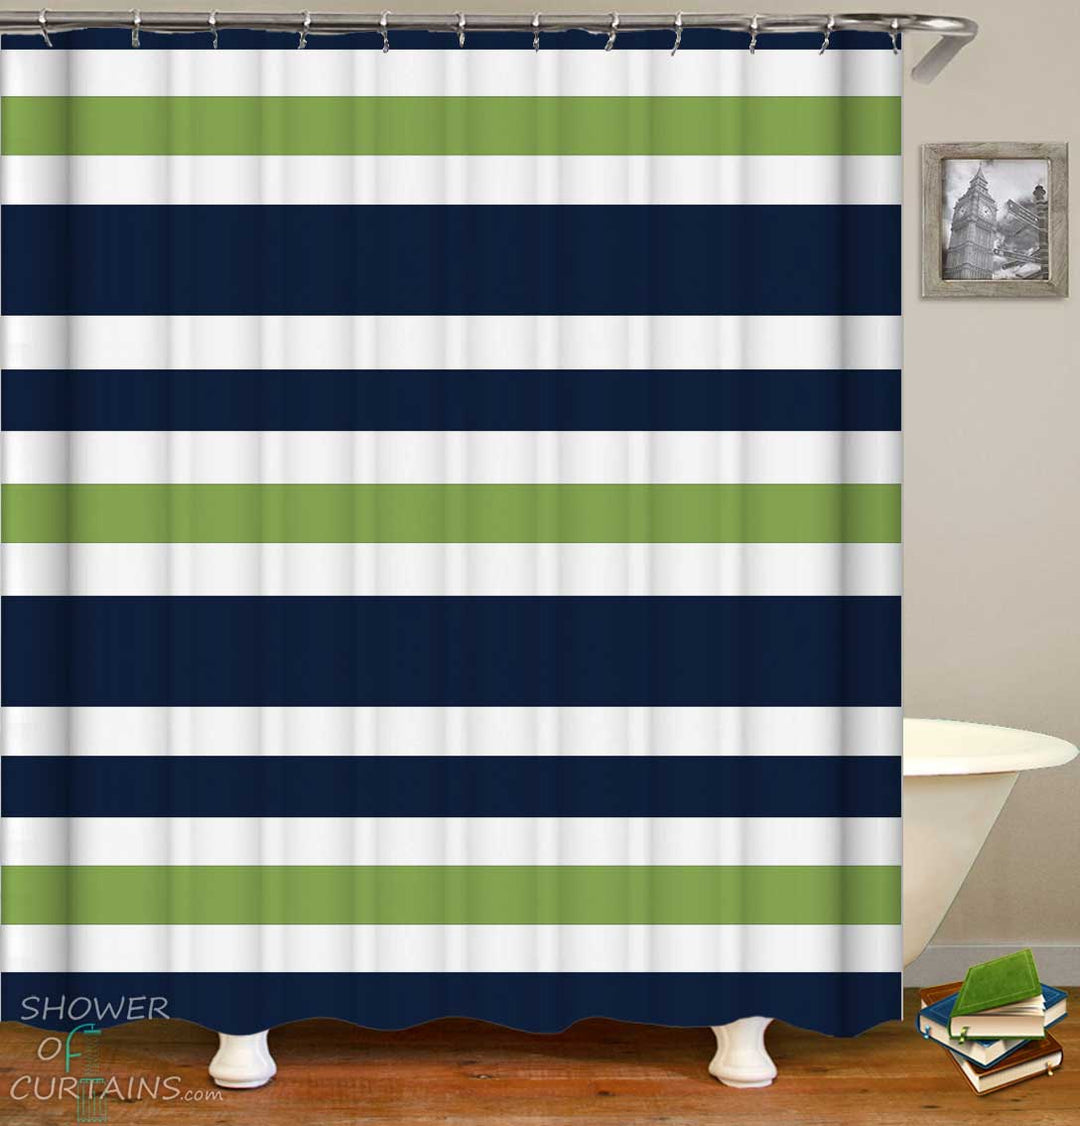 Shower Curtains with Green and Blue Stripes